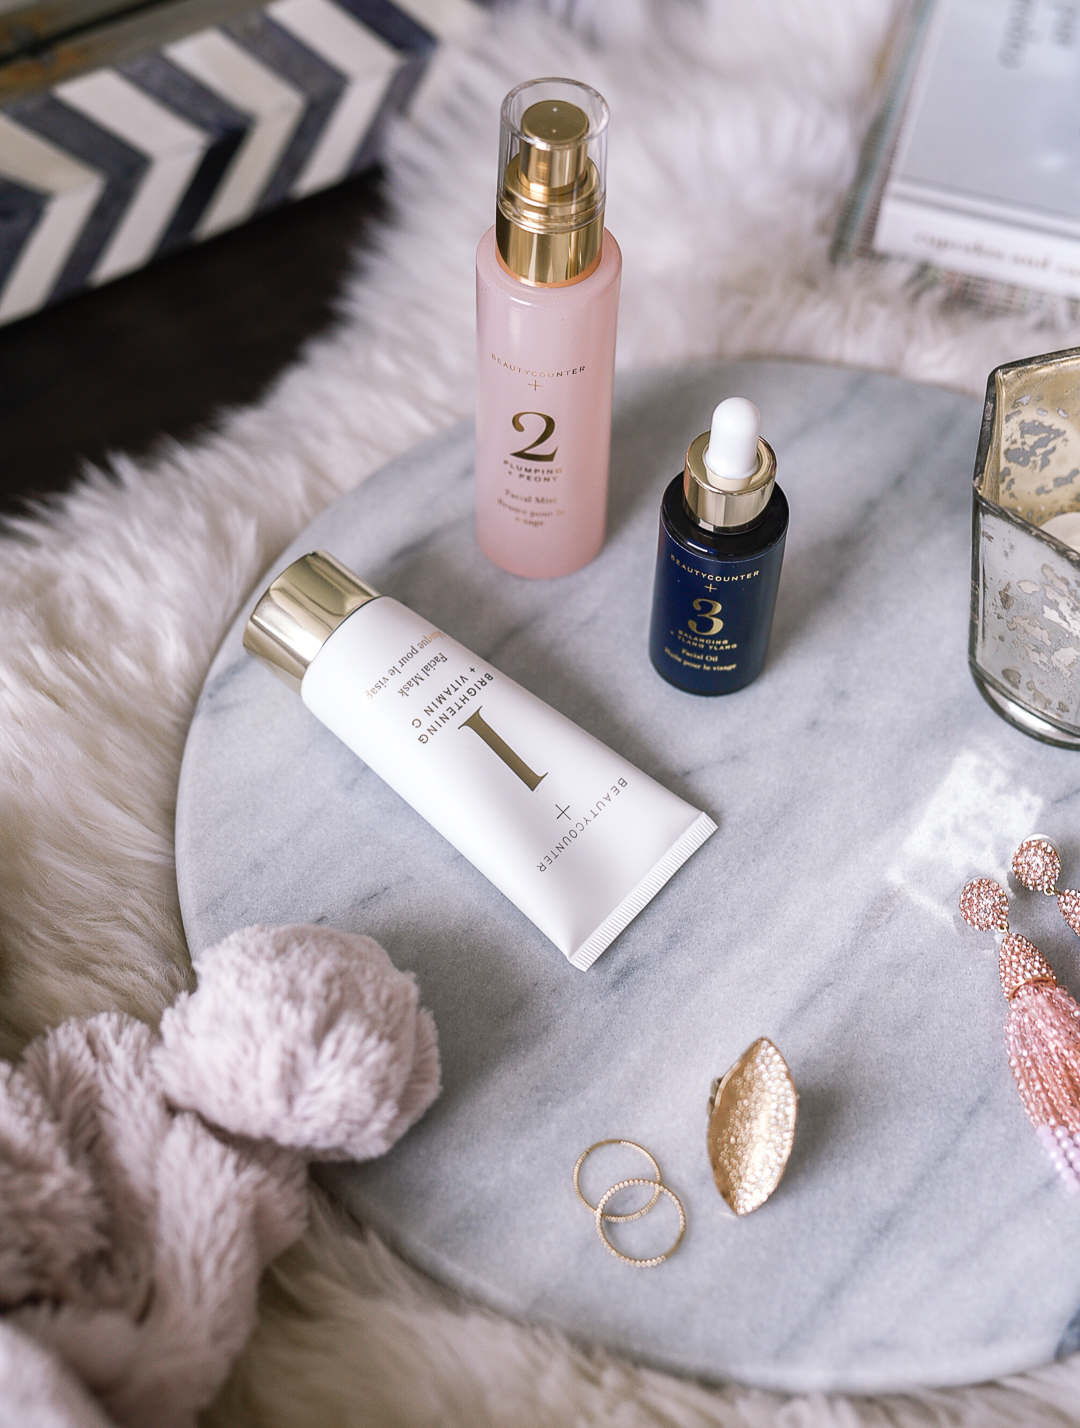 how to use face oil - Why You Should Be Using BeautyCounter Face Oil by Chicago style blogger Visions of Vogue